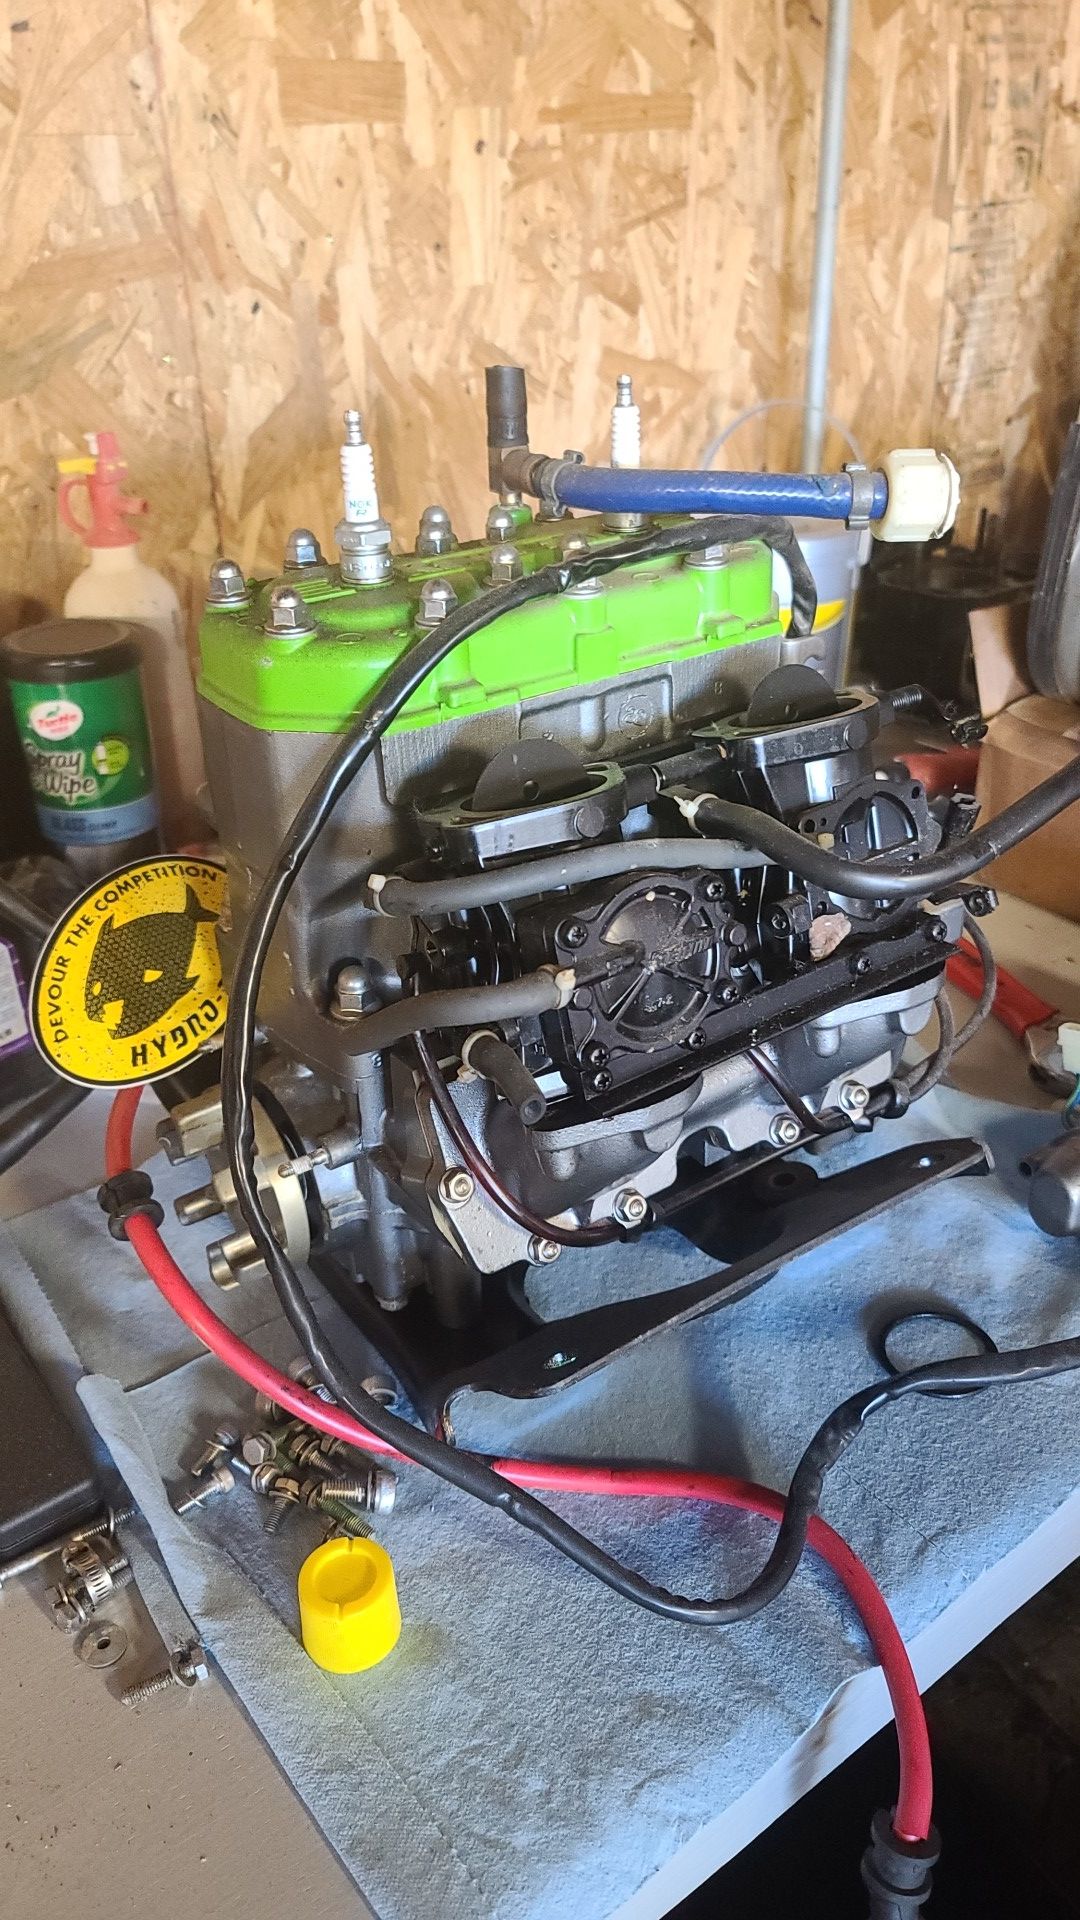 750ssxi motor. Complete with carbs and ebox